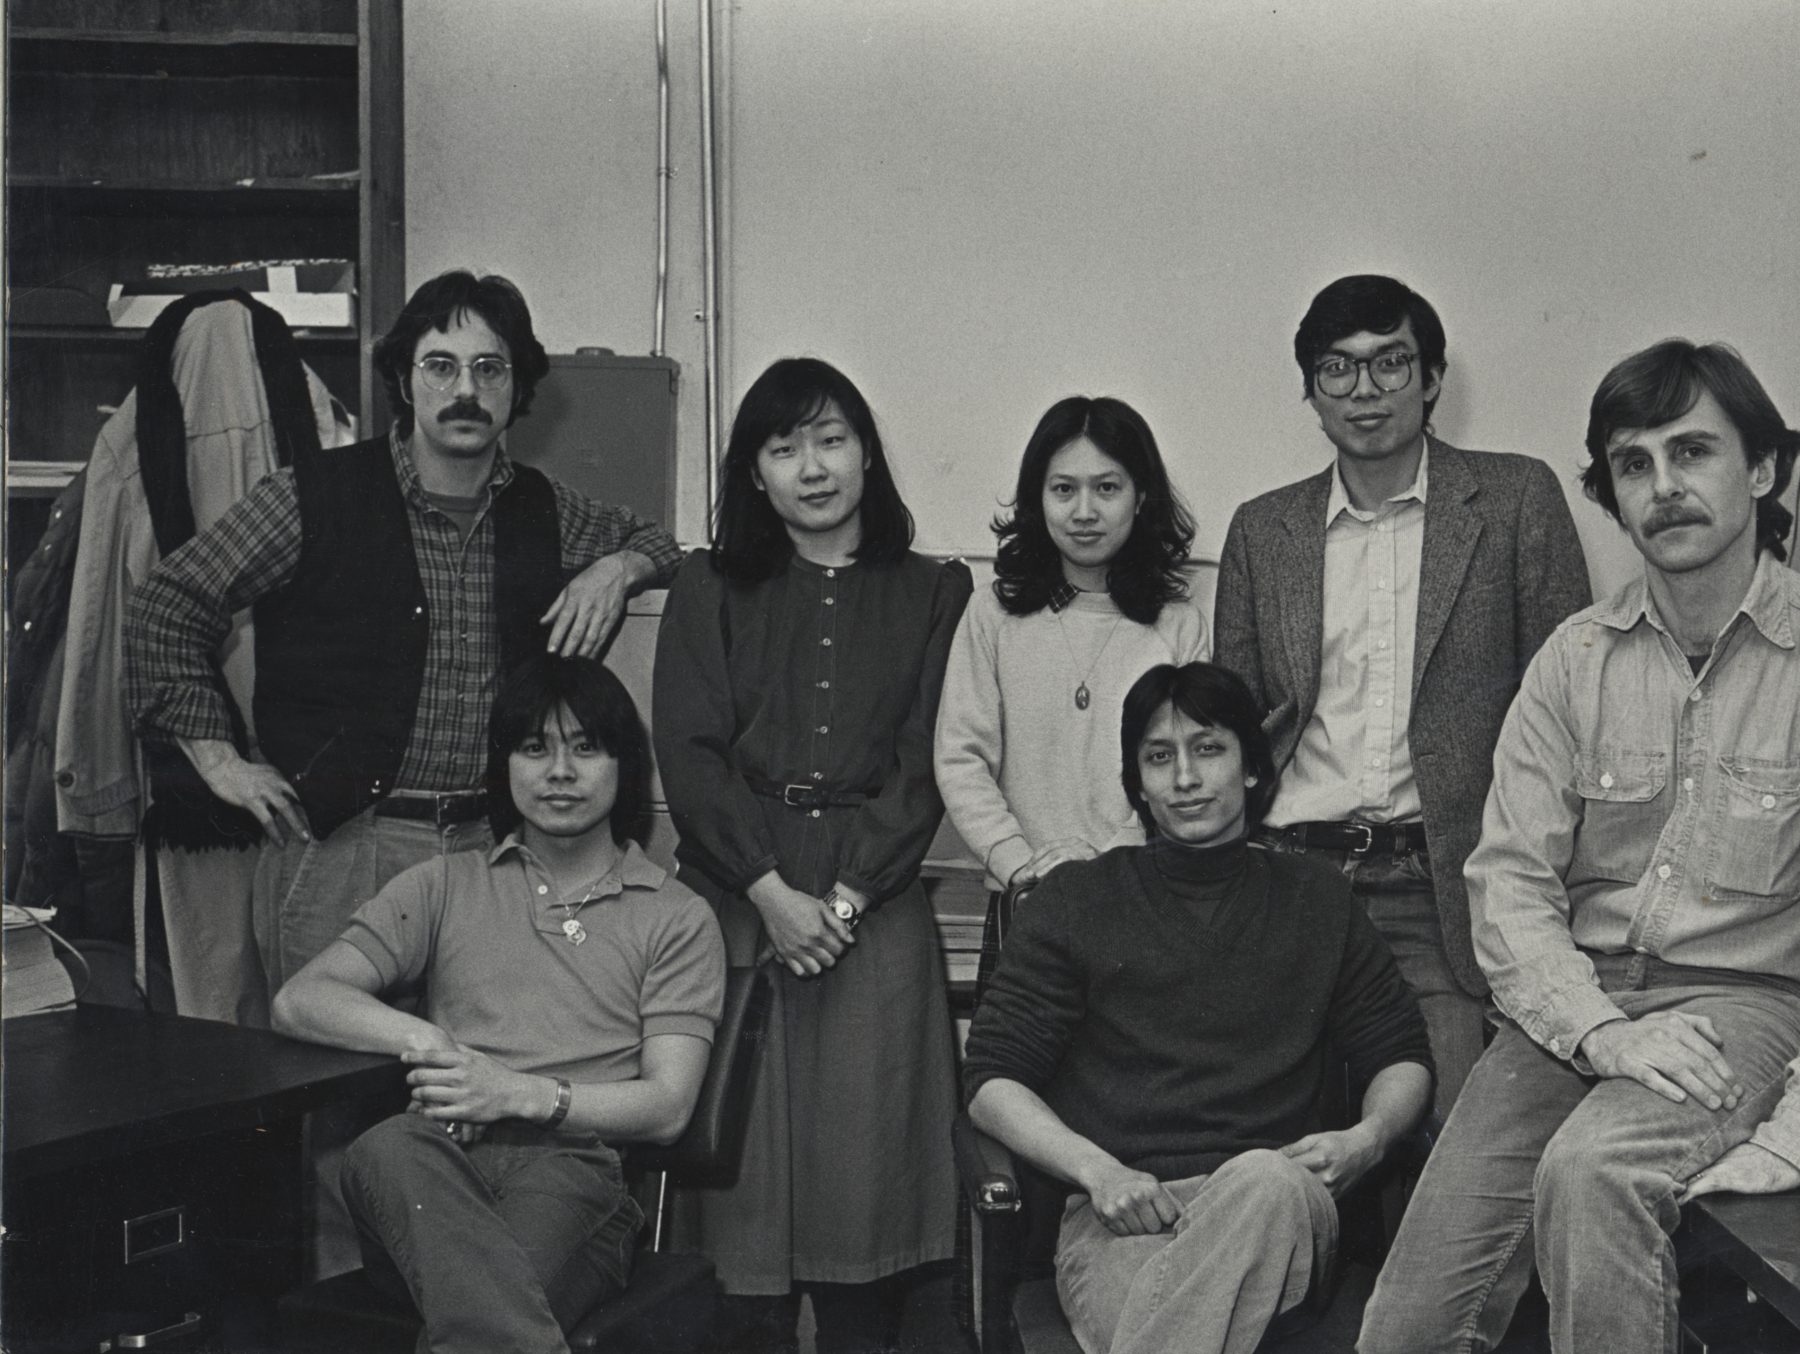 03 & 04 June 2019 Posted.
Paul Calhoun is the farthest on the right, Bud Glick is on the far left in the photograph, Museum of Chinese in America (MOCA) Institutional Collection.
Paul Calhoun位于照片的最右边，Bud Glick位于照片的最左边，美国华人博物馆（MOCA）机构档案